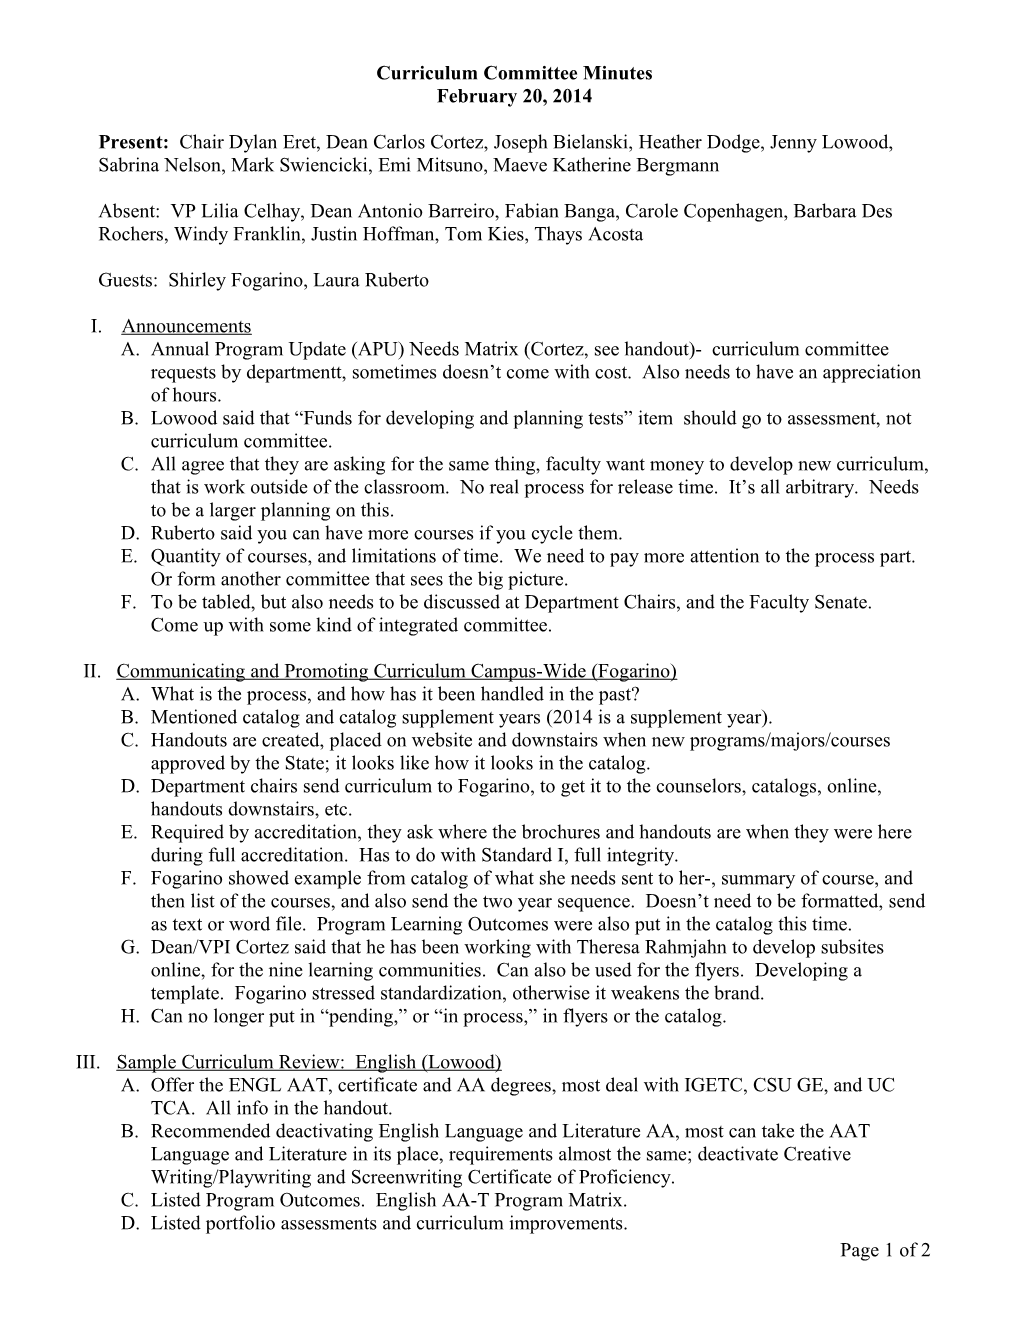 Curriculum Committee Minutes s1